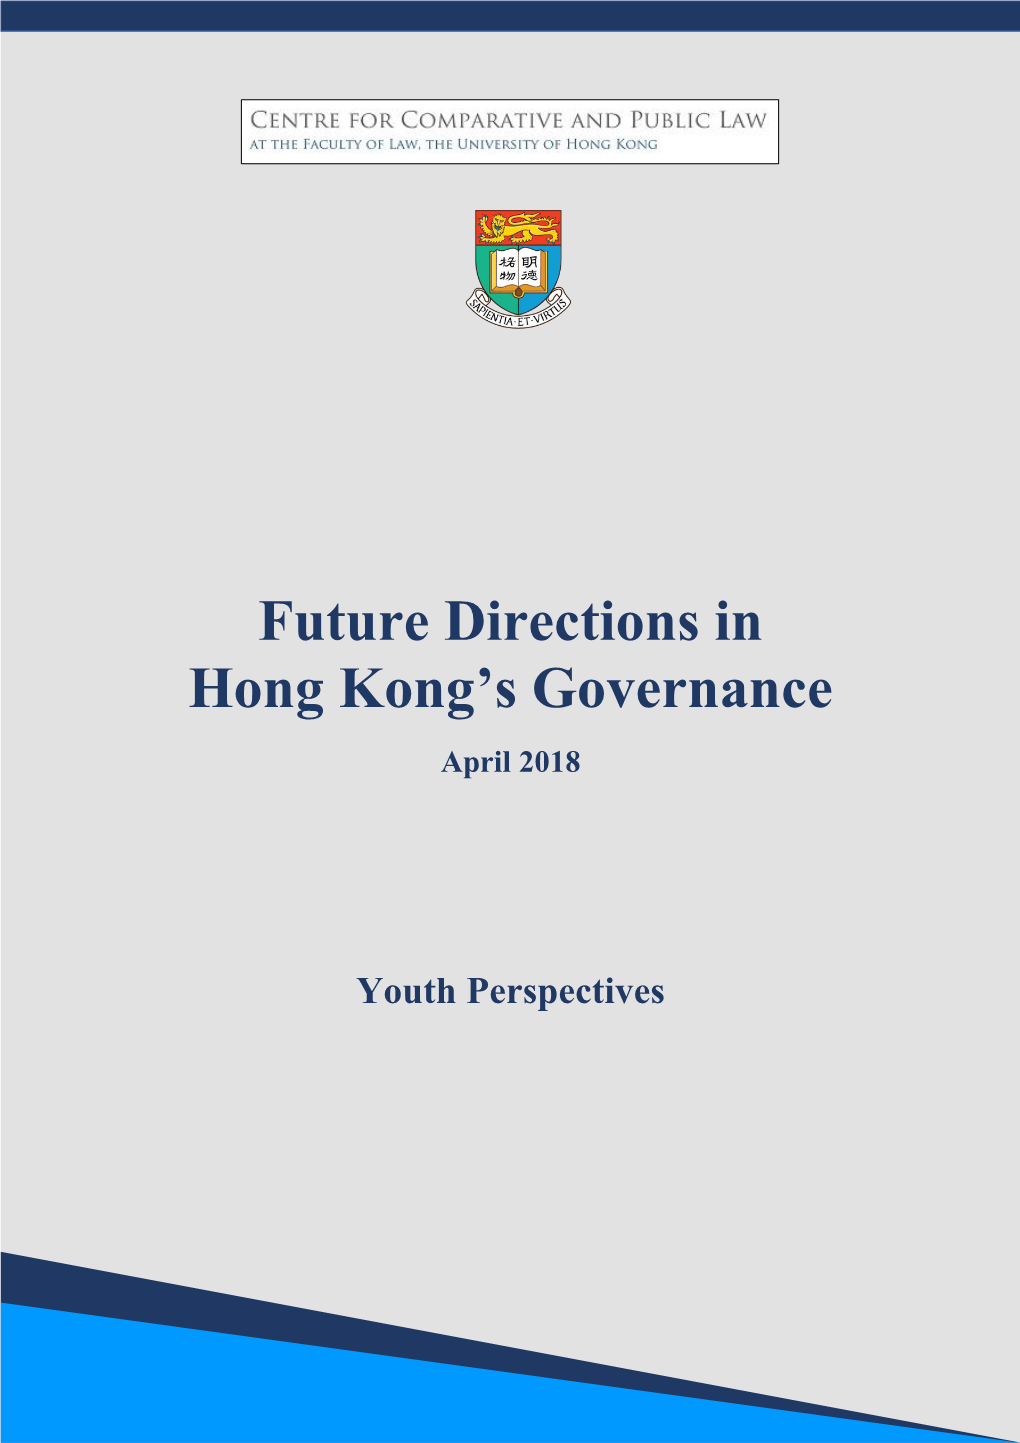 Future Directions in Hong Kong's Governance